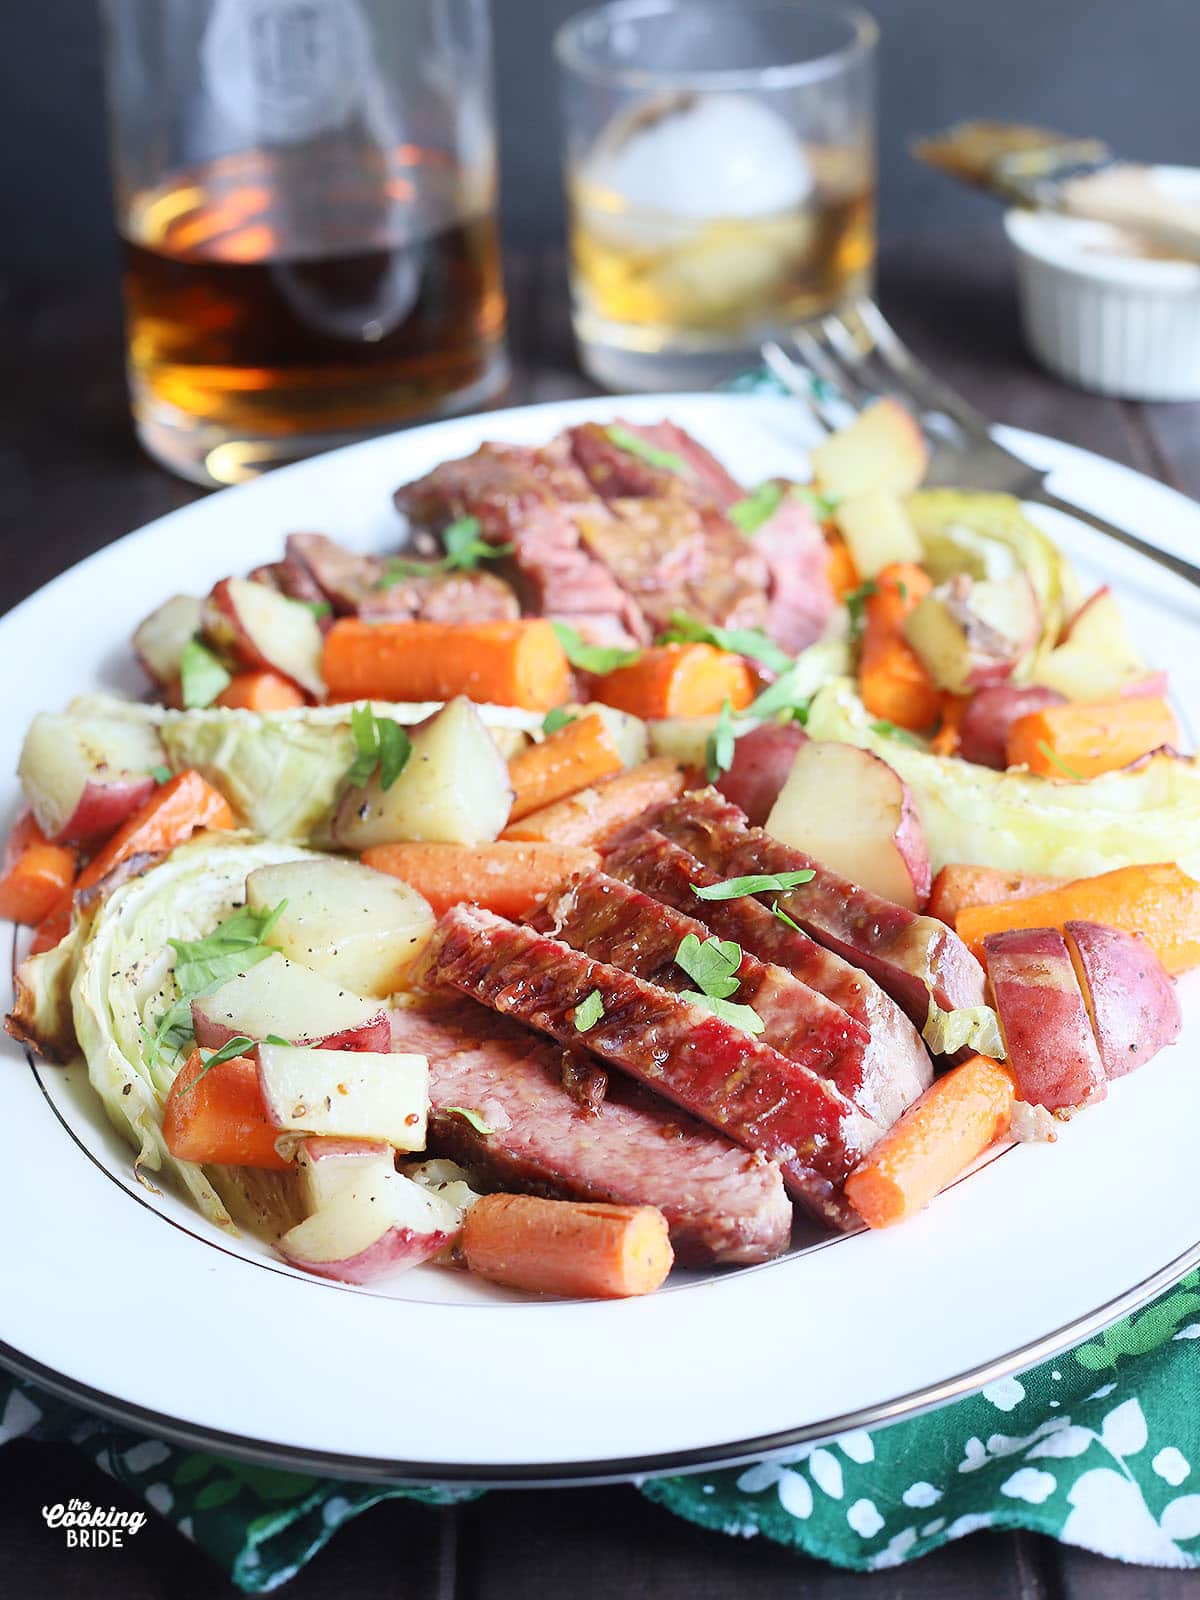 side view of sliced bourbon glazed corned beef and roasted vegetables on a white platter with a bottle of bourbon and glass in the background